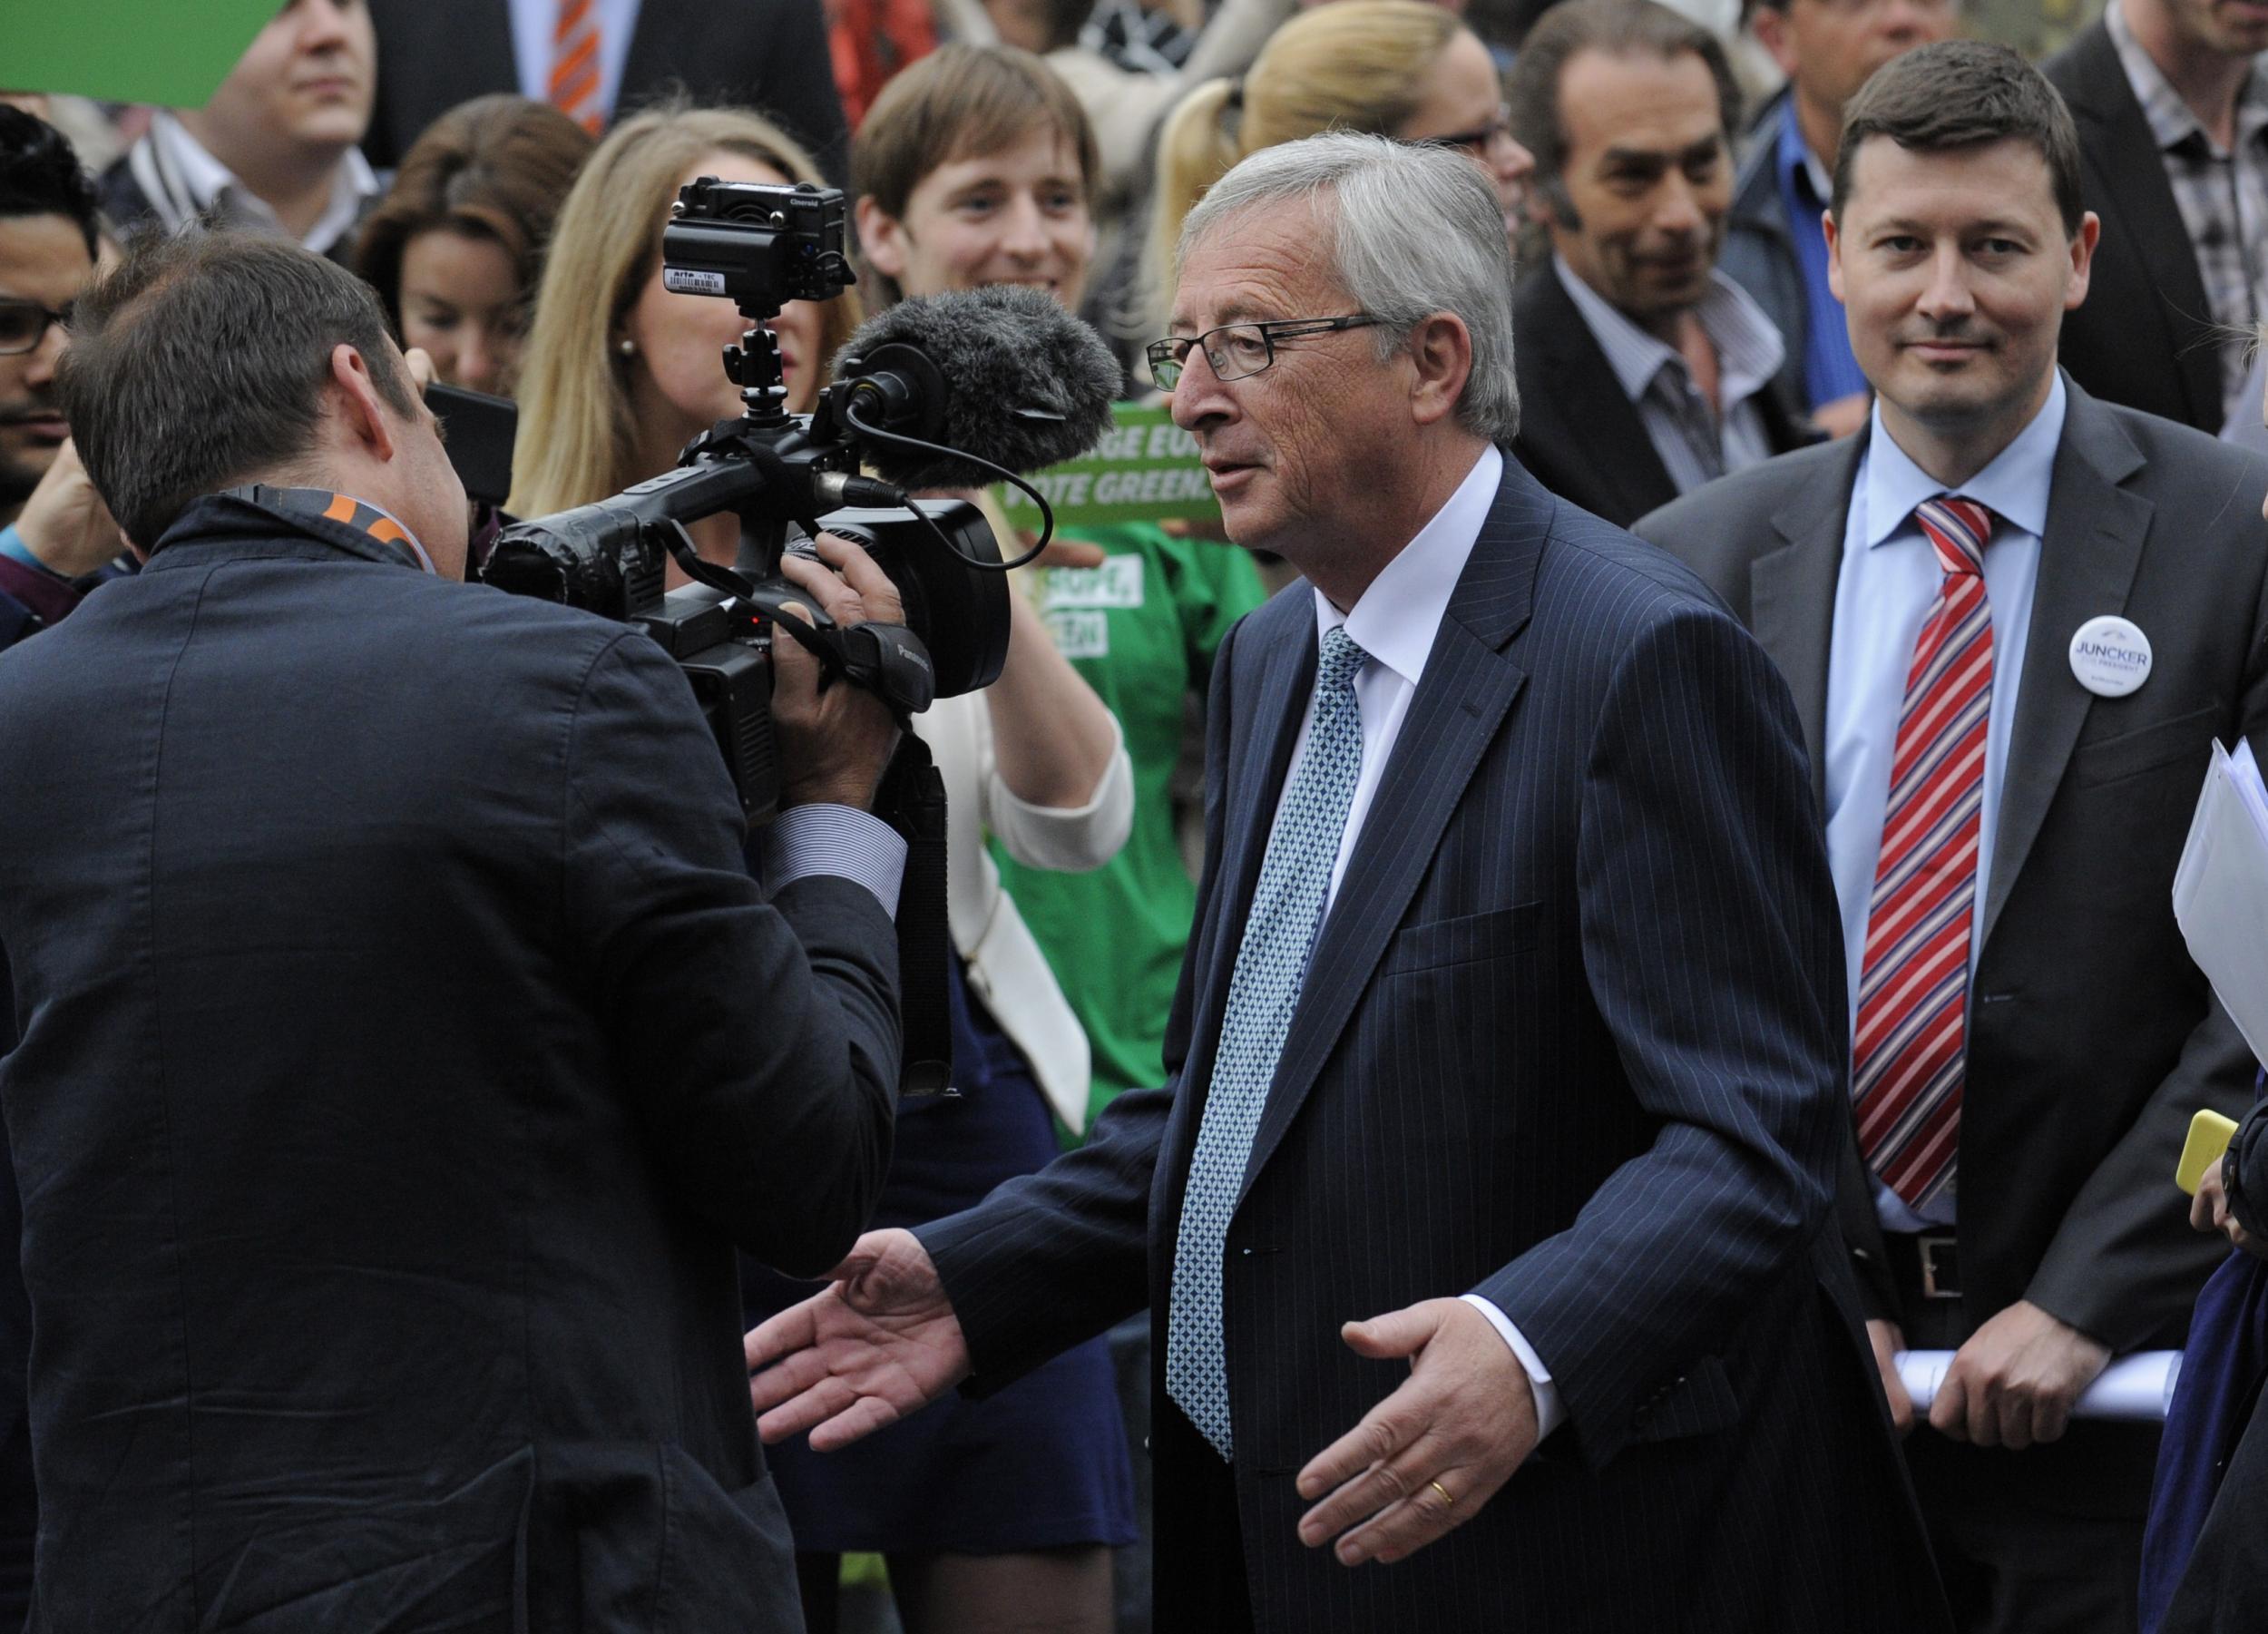 Martin Selmayr (right) stands off camera as Jean-Claude Juncker speaks to journalists